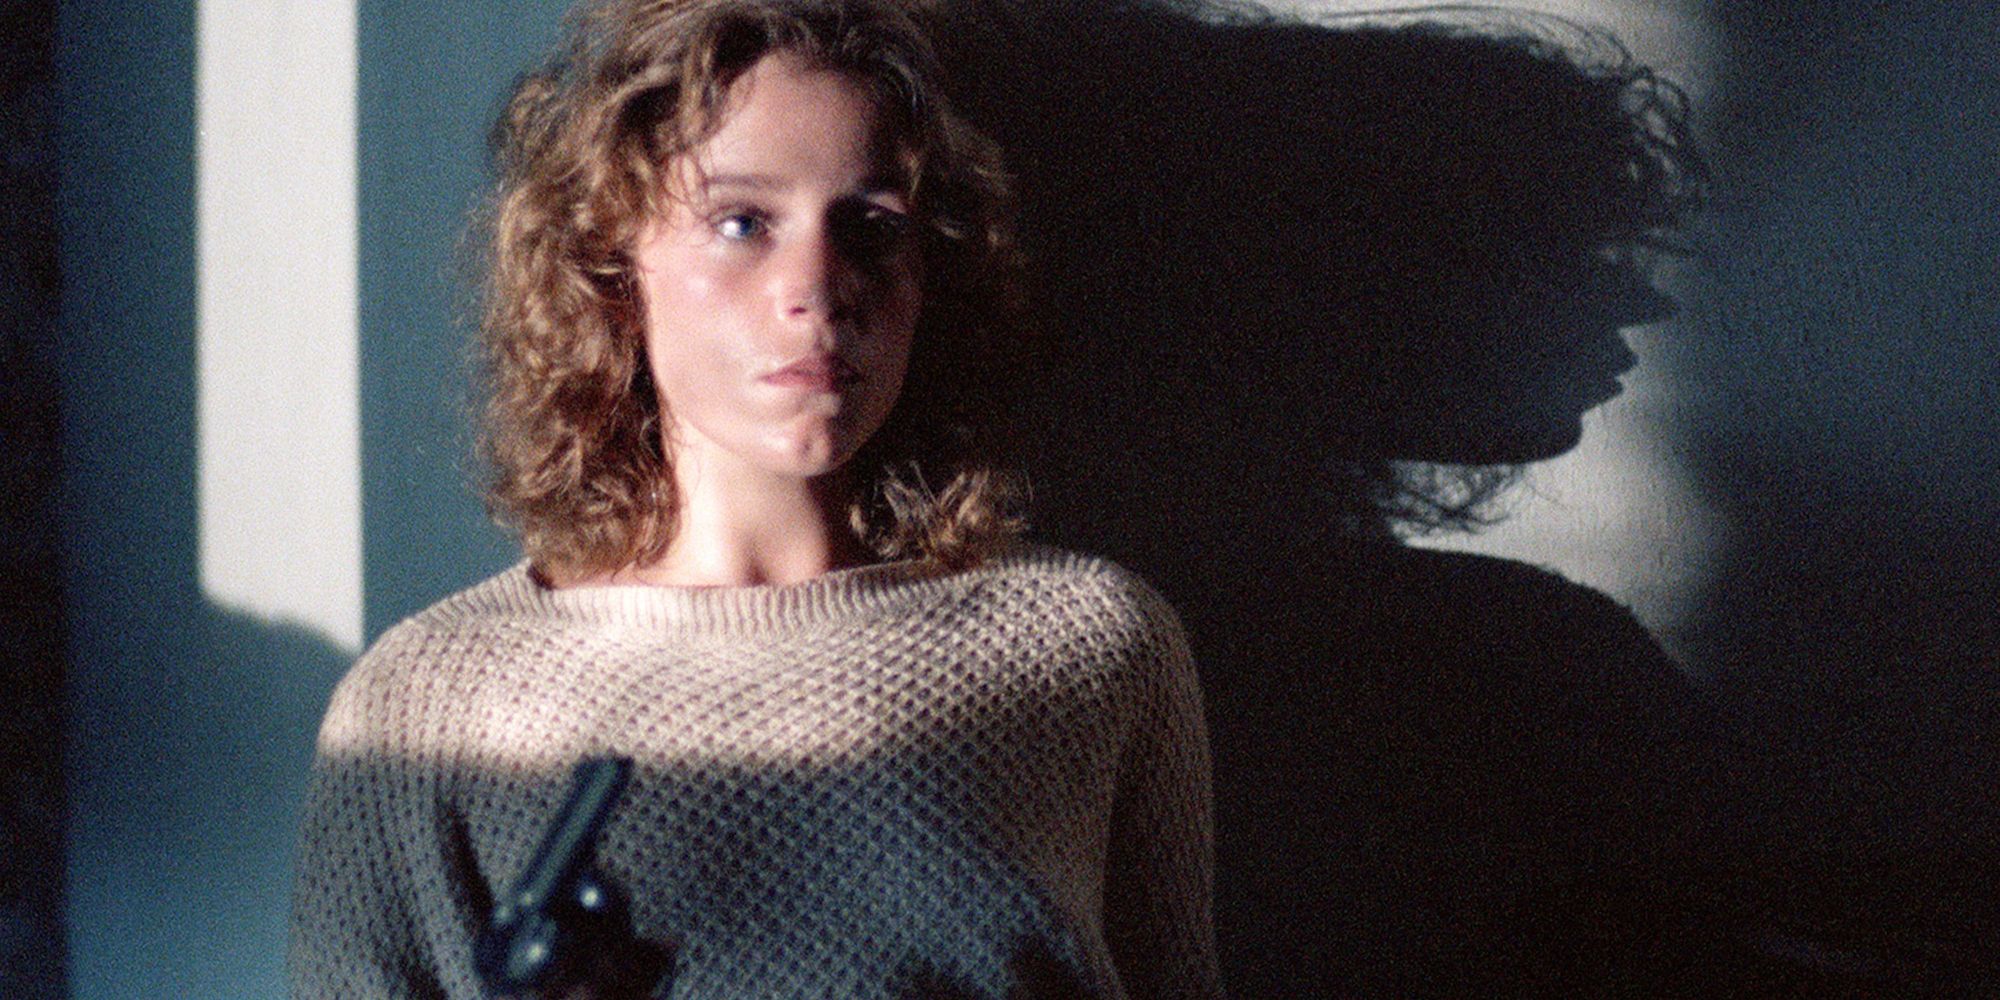 Frances McDormand as Abby holding a gun and looking scared in the film Blood Simple